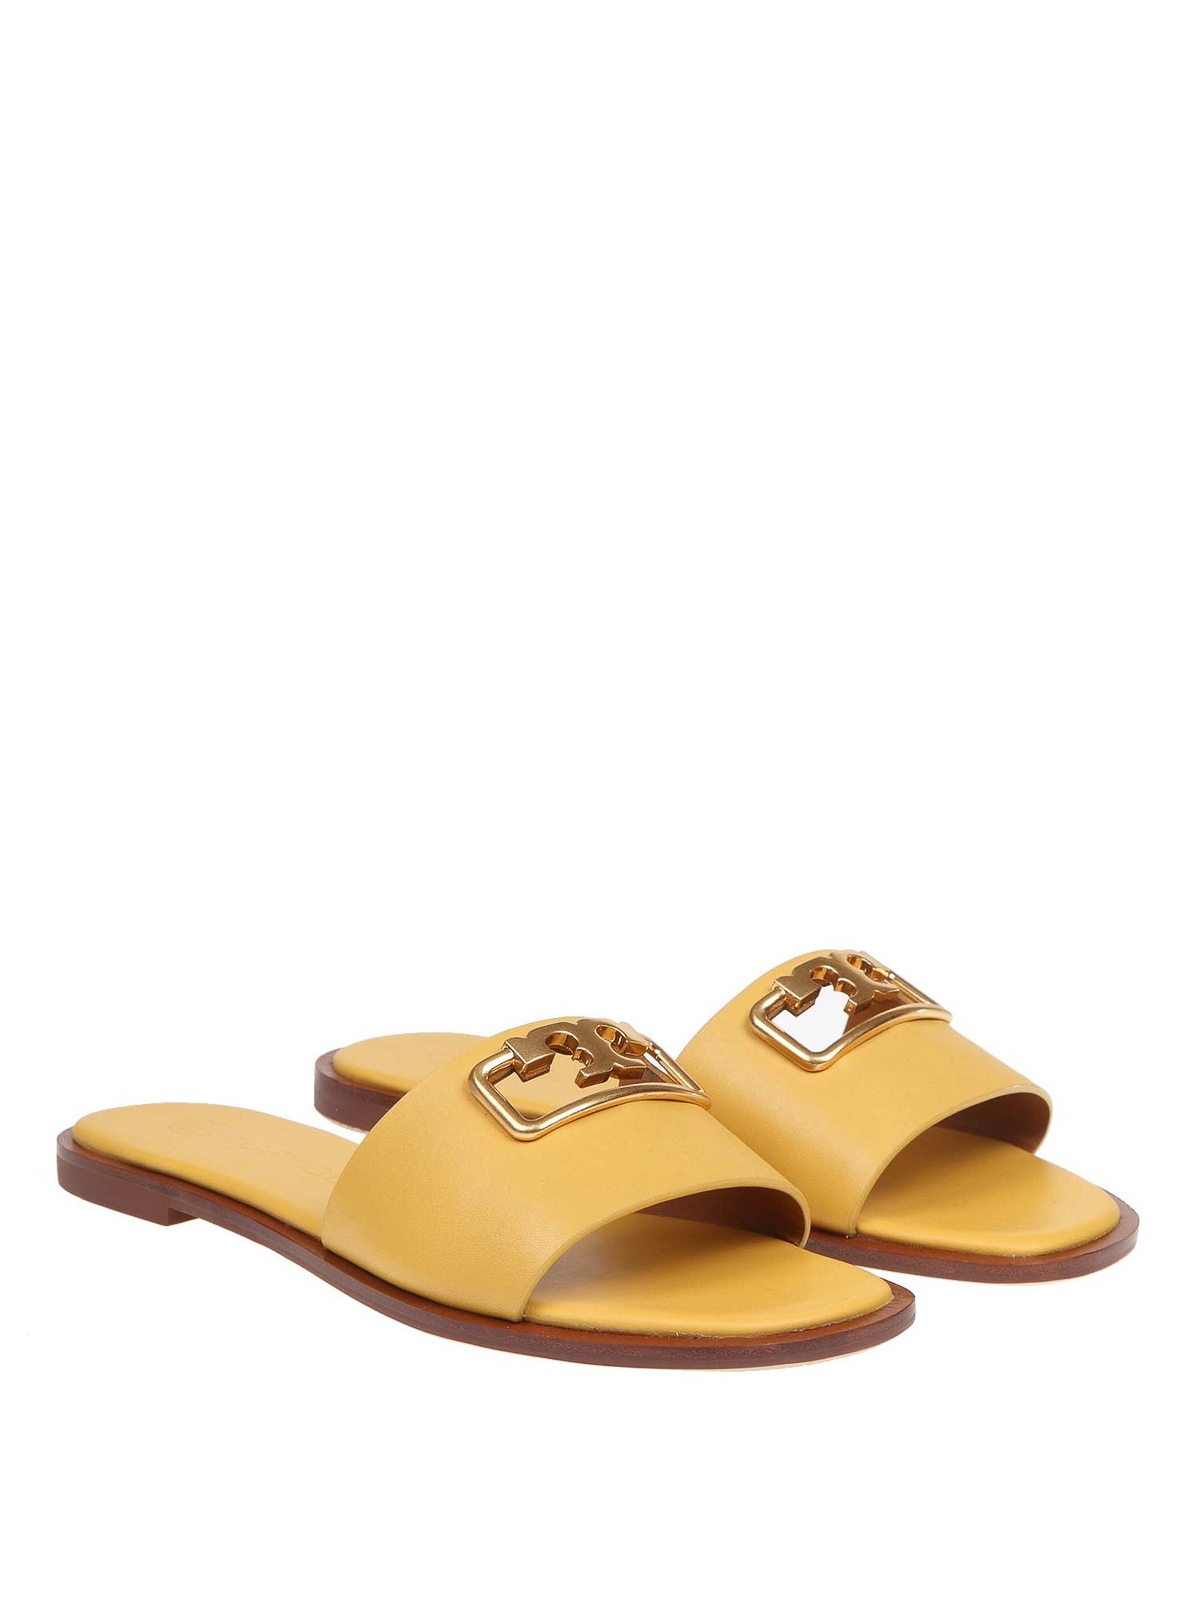 selby slide tory burch